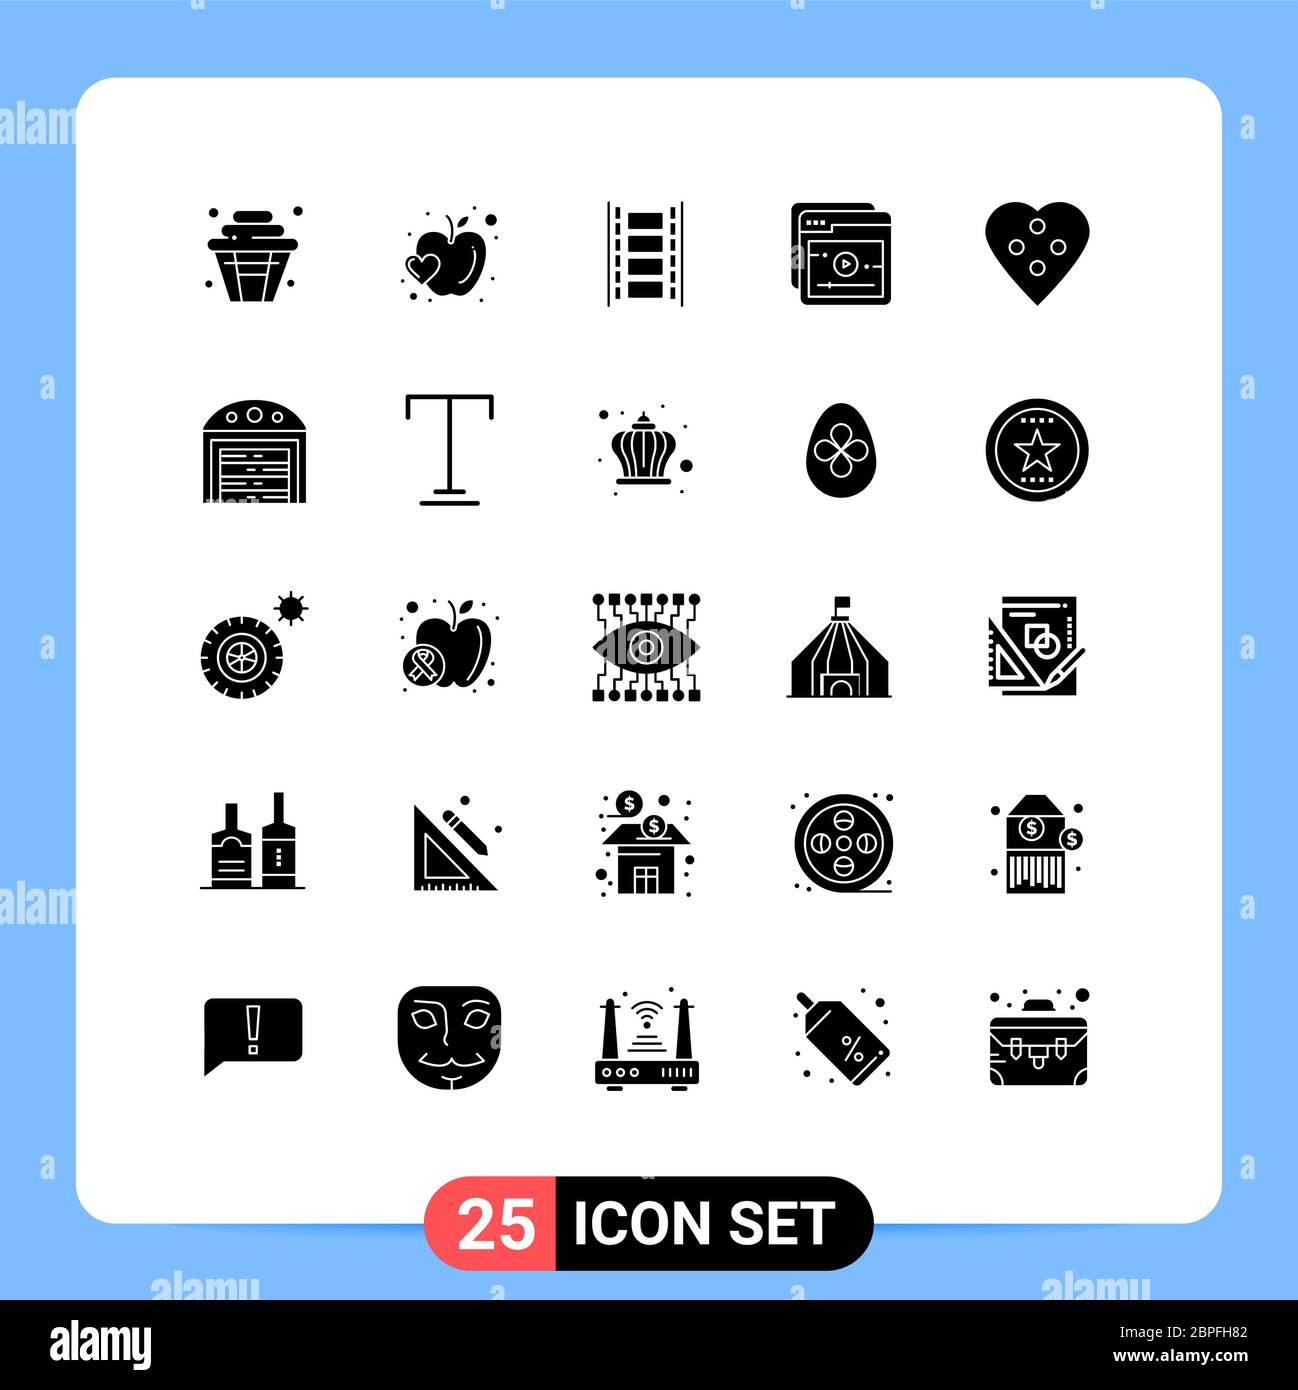 Mobile Interface Solid Glyph Set of 25 Pictograms of dressmaking, button, animation, study, education Editable Vector Design Elements Stock Vector